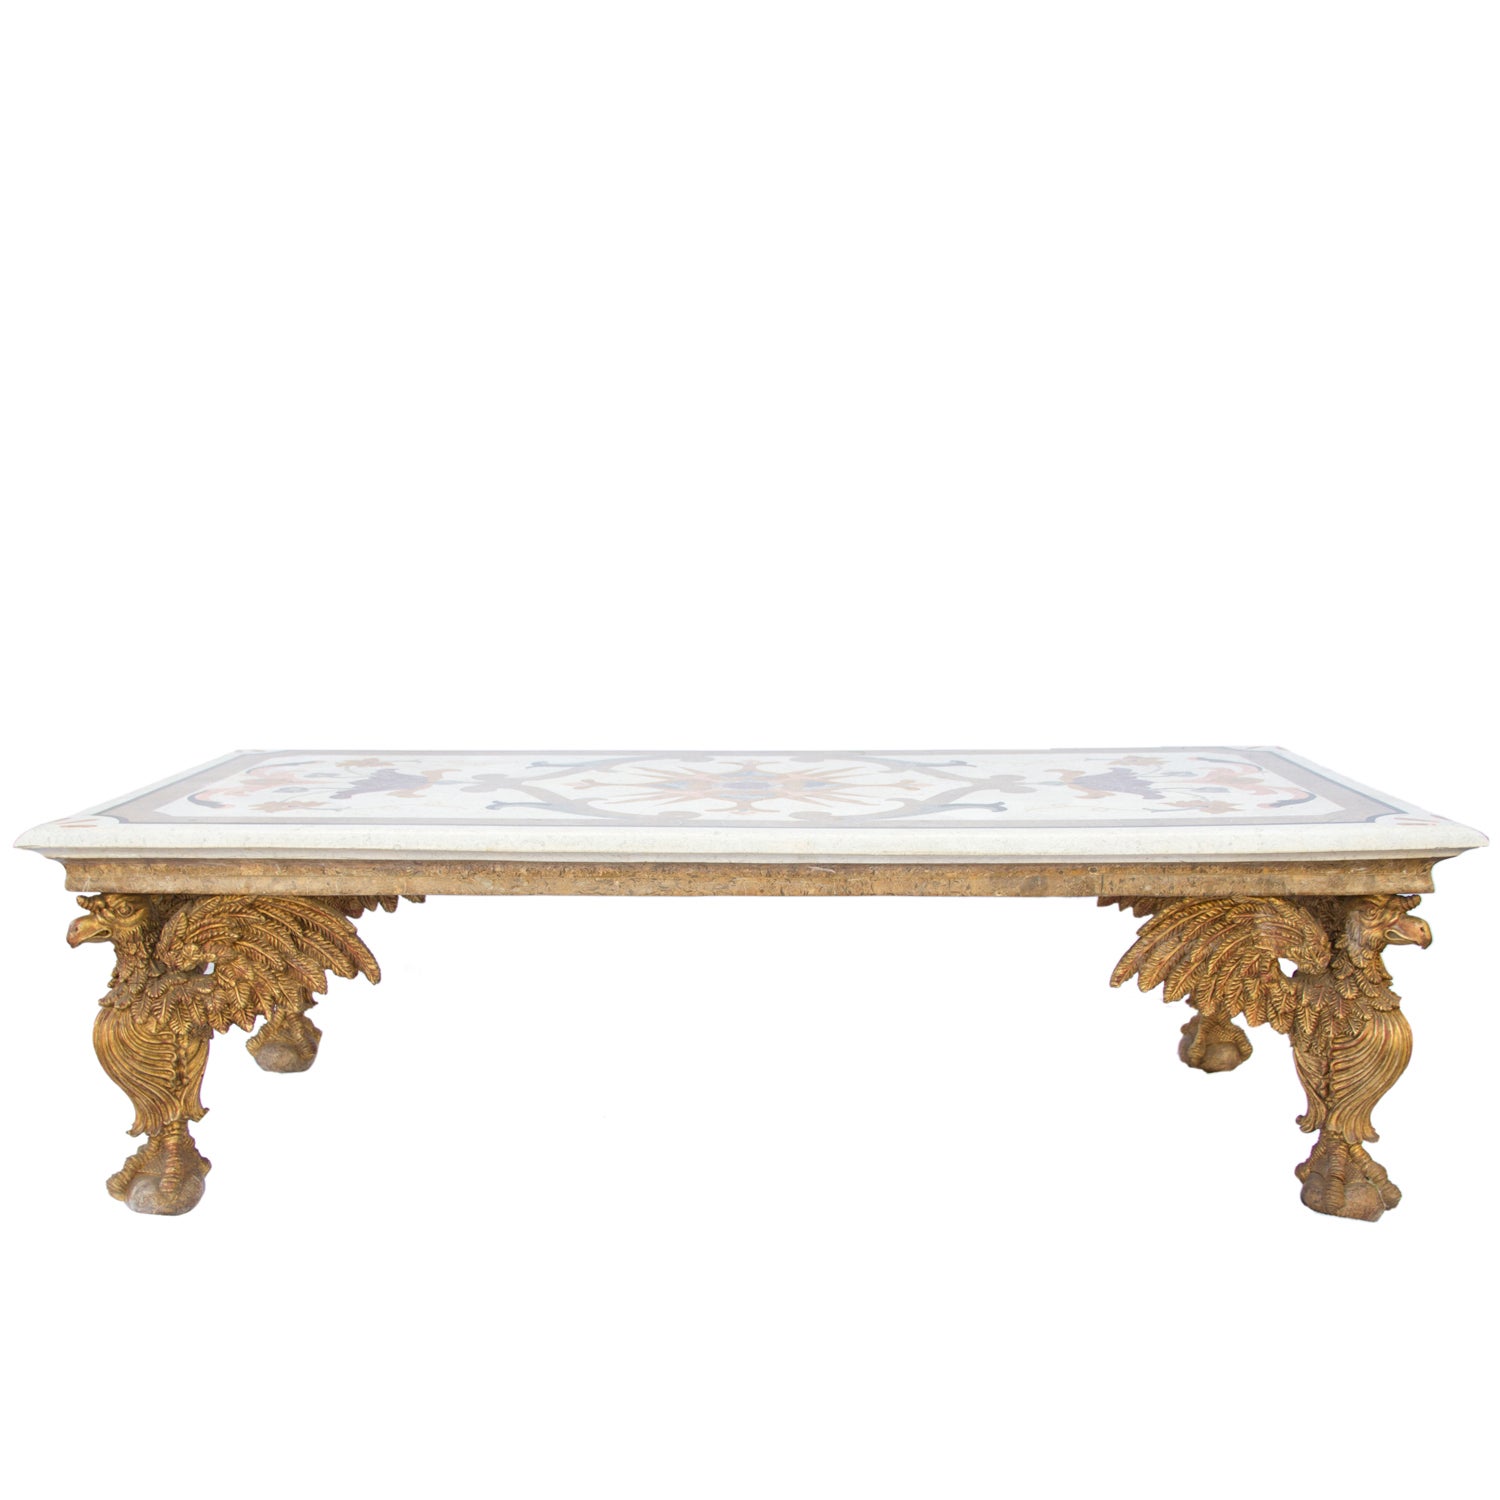 A George II Style Specimen Marble and Giltwood Coffee Table